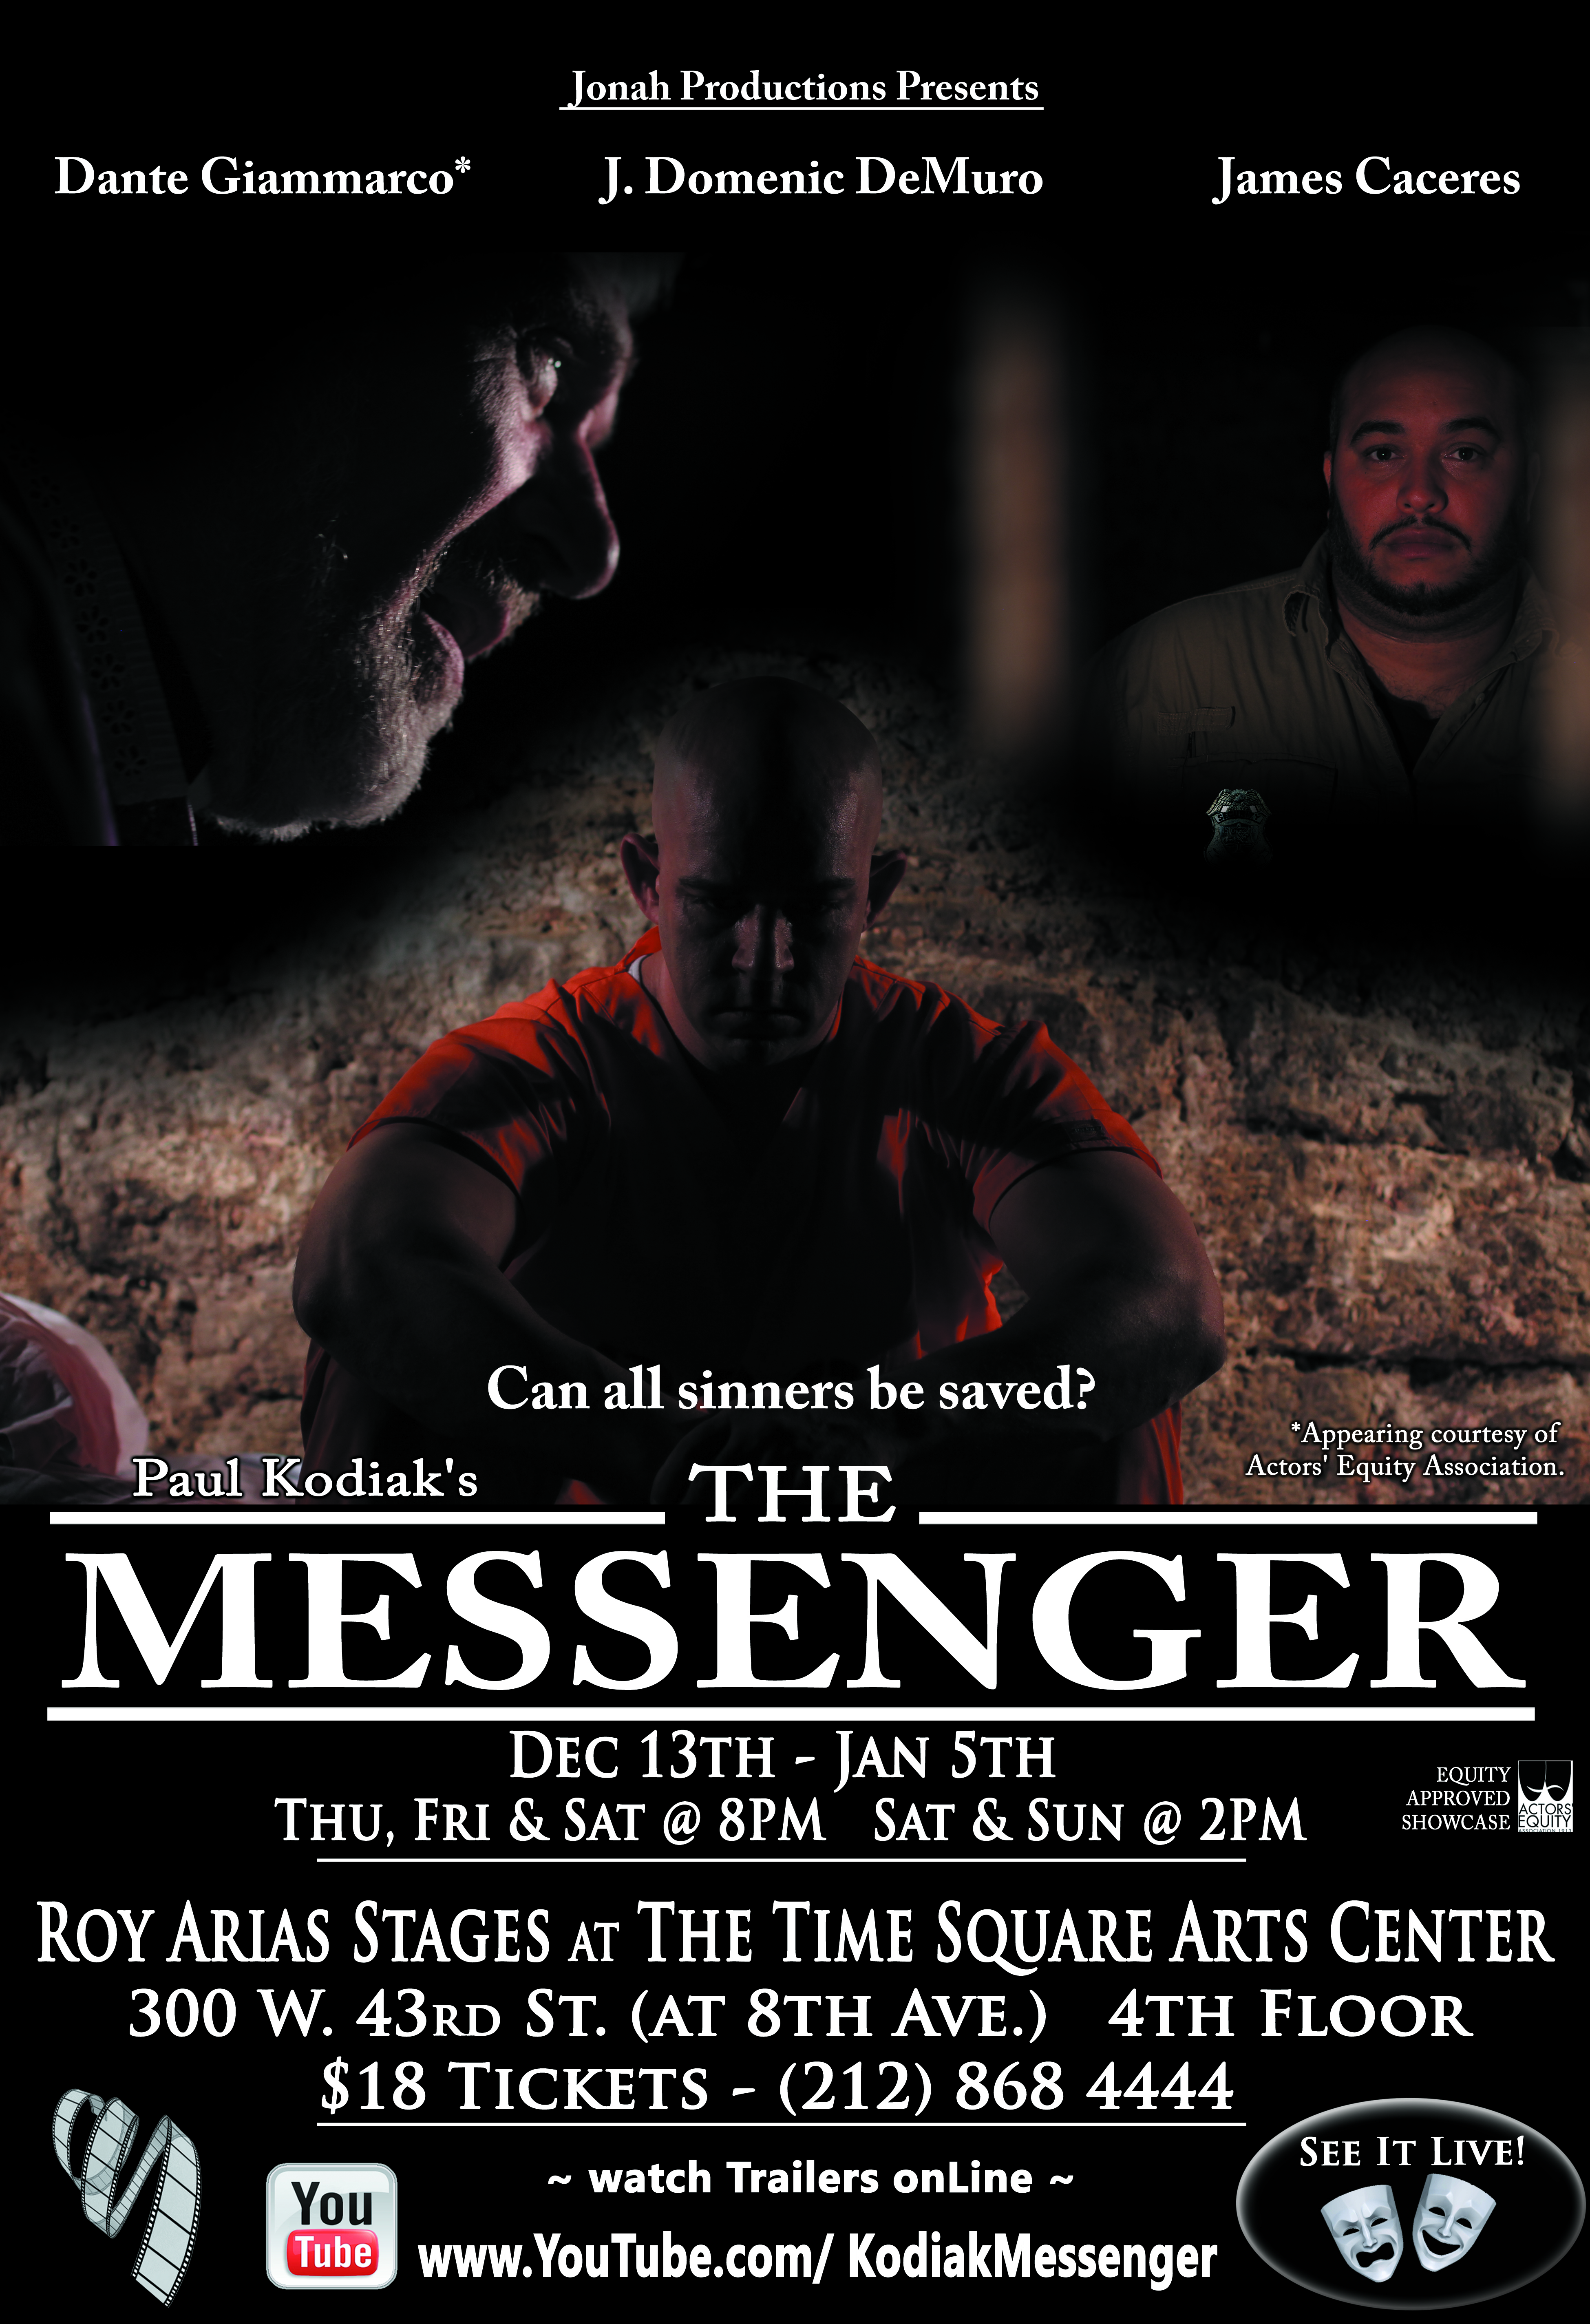 NY Daily News Top 10 Theatre Picks. The Messenger - Off Broadway Dec13-Jan 5 2013